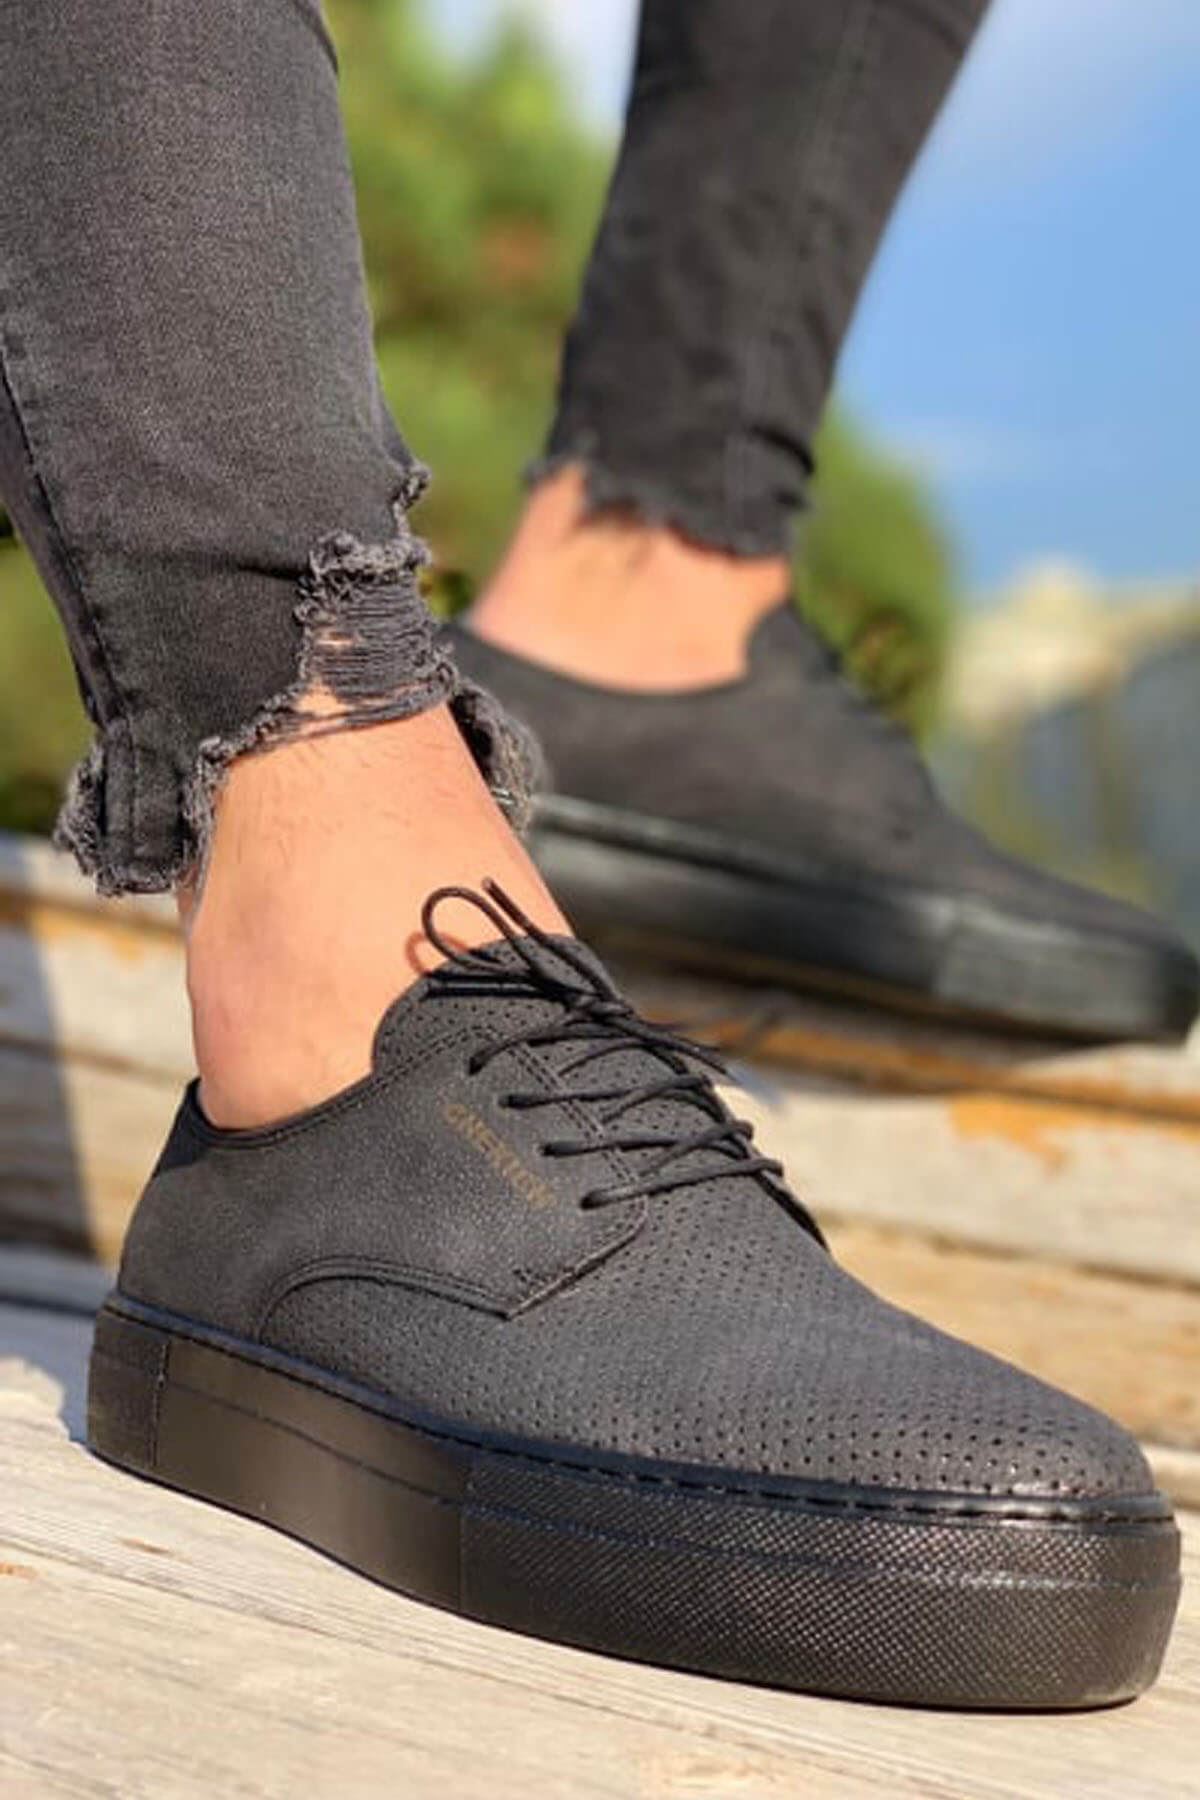 Chekich Men's and Women's Casual Shoes Anthracite Color Non Leather Laces Spring & Fall Seasons Gray Unisex Classic Formal 2021 Fashion Platform Lightweight Sneakers Fabric Breathable New Brand High Quality CH061 V2